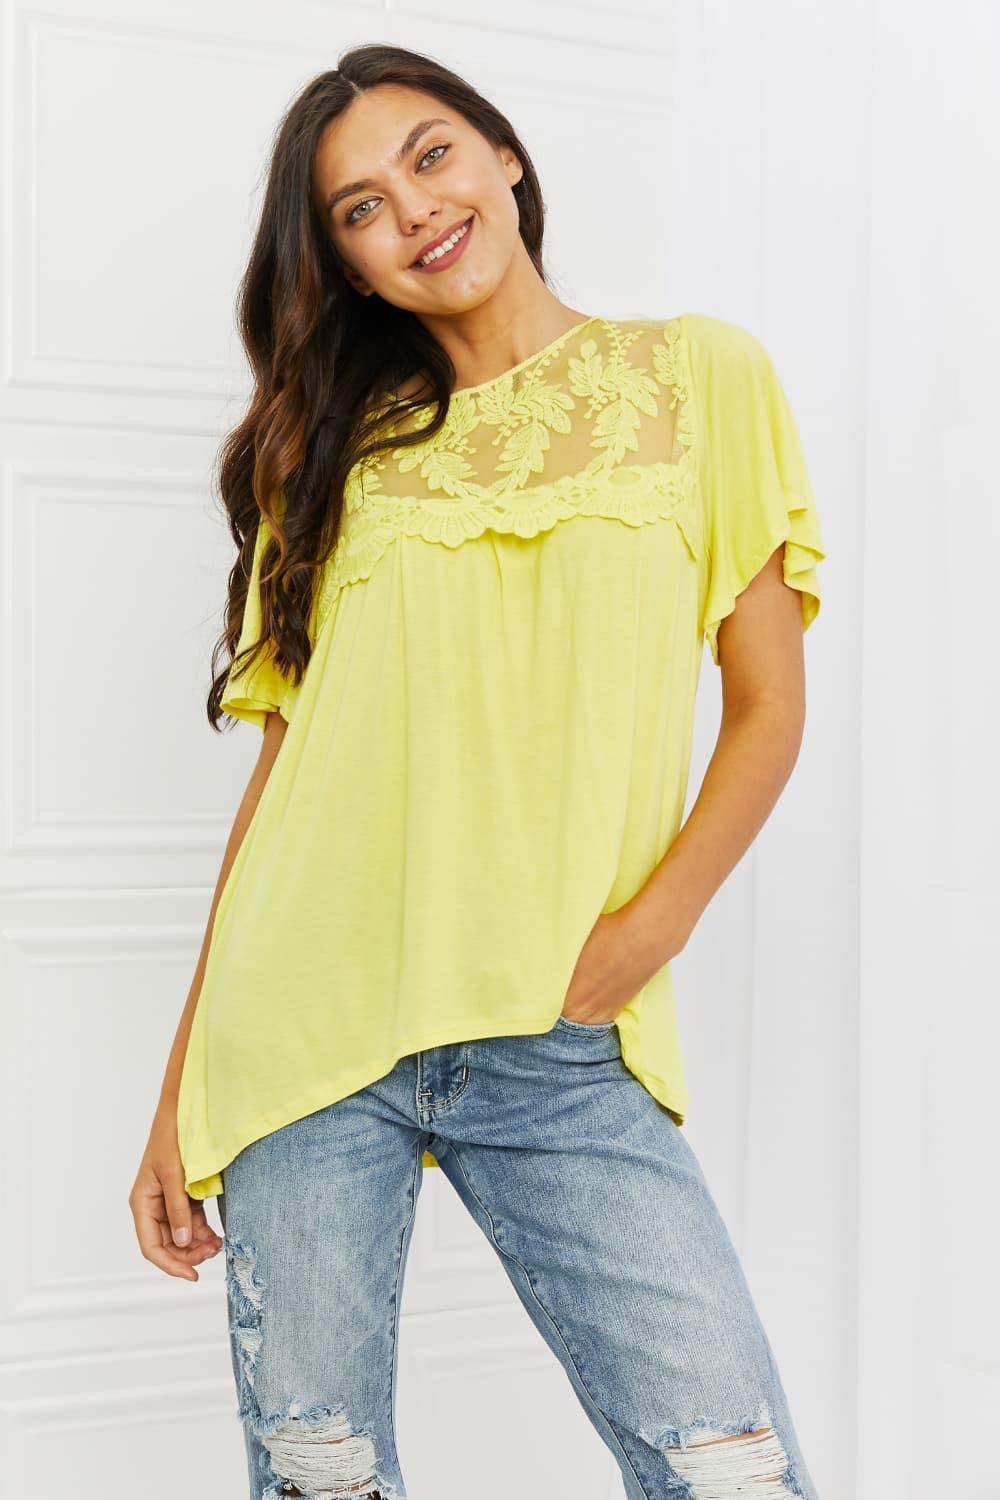 Intriguing Lace Embroidered Lace Yellow Top - MXSTUDIO.COM